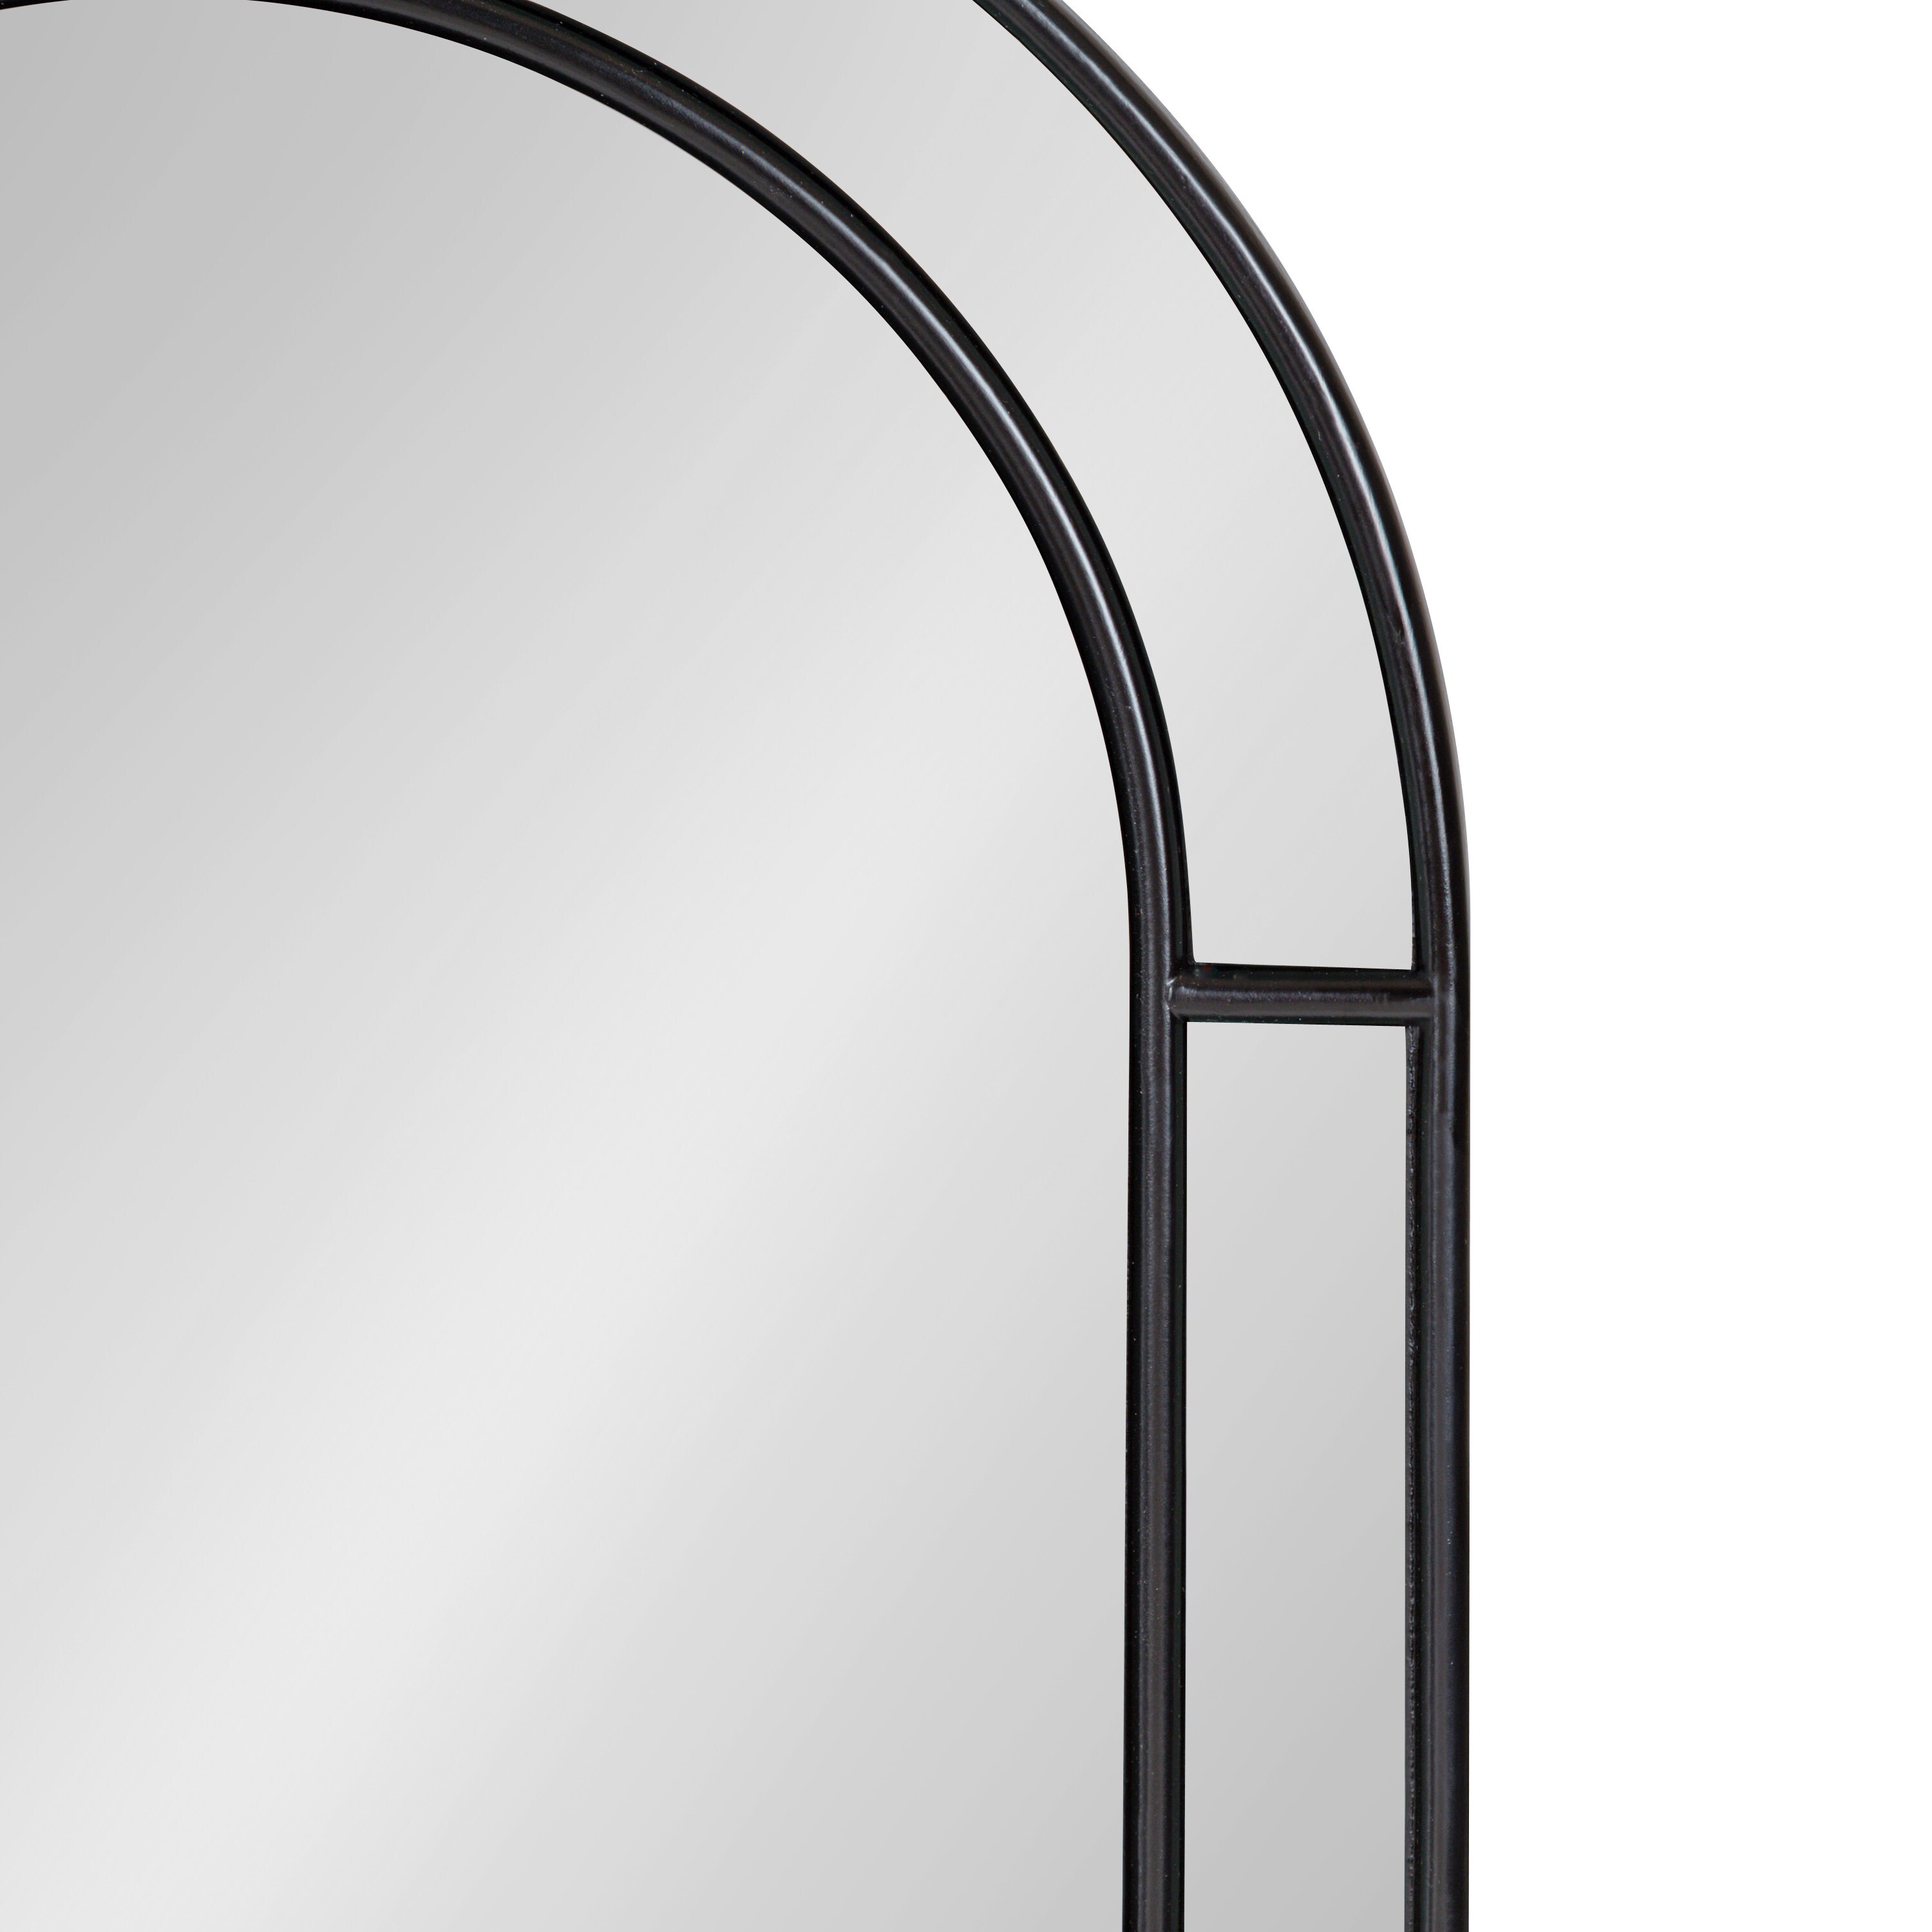 Kate and Laurel Fairbrook 18-in W x 24-in H Arch Black Framed Wall Mirror